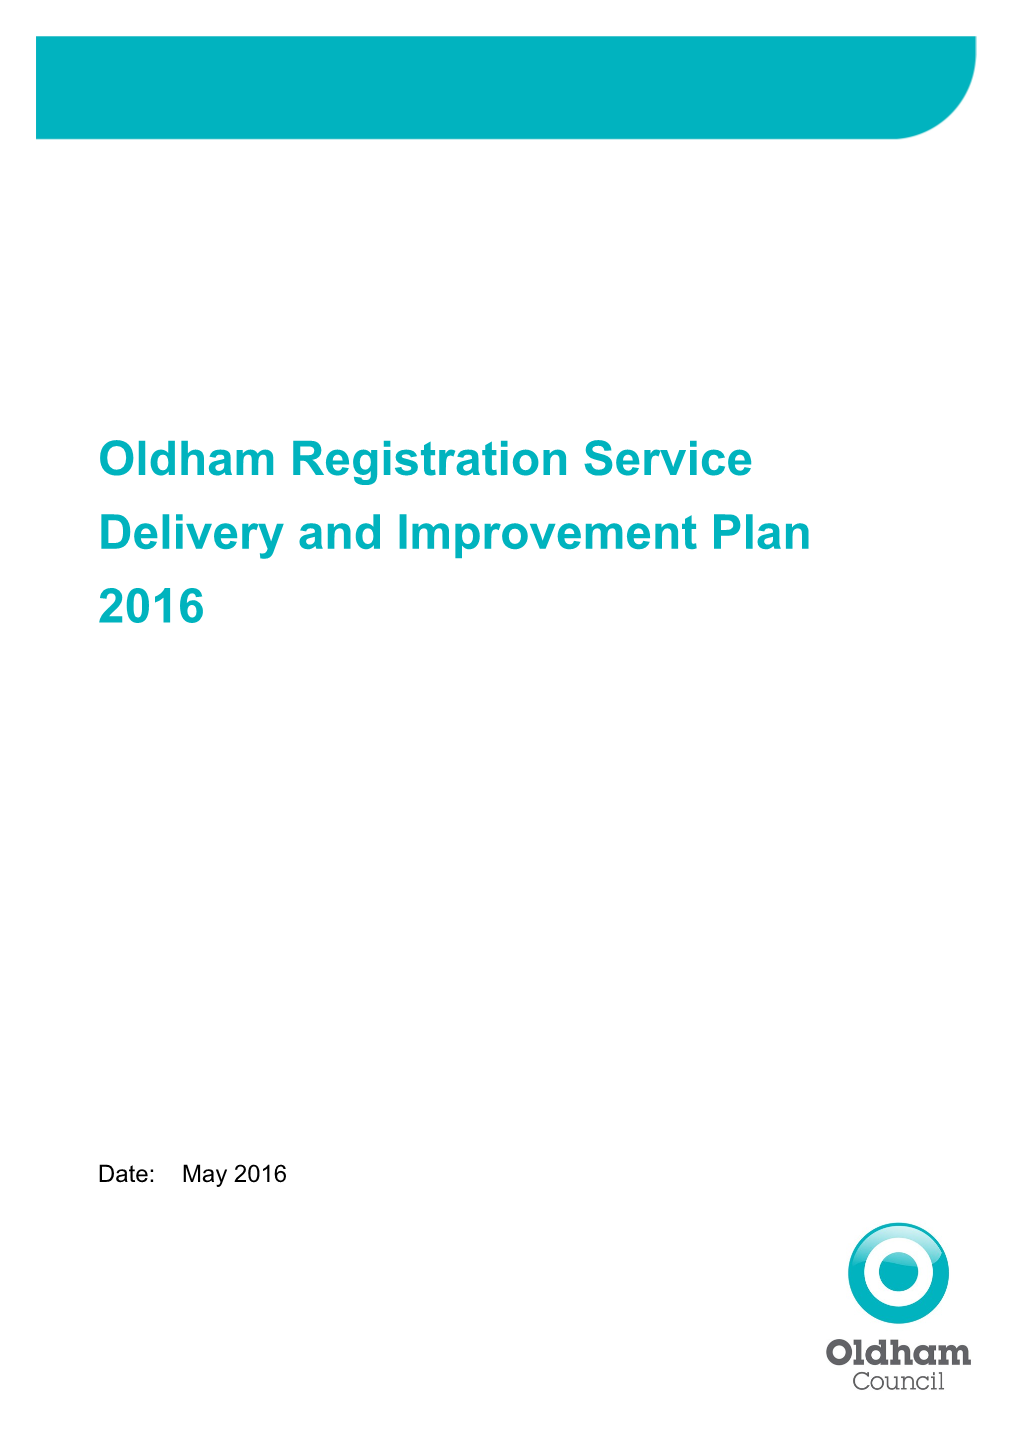 Oldham Registration Service Delivery and Improvement Plan 2016